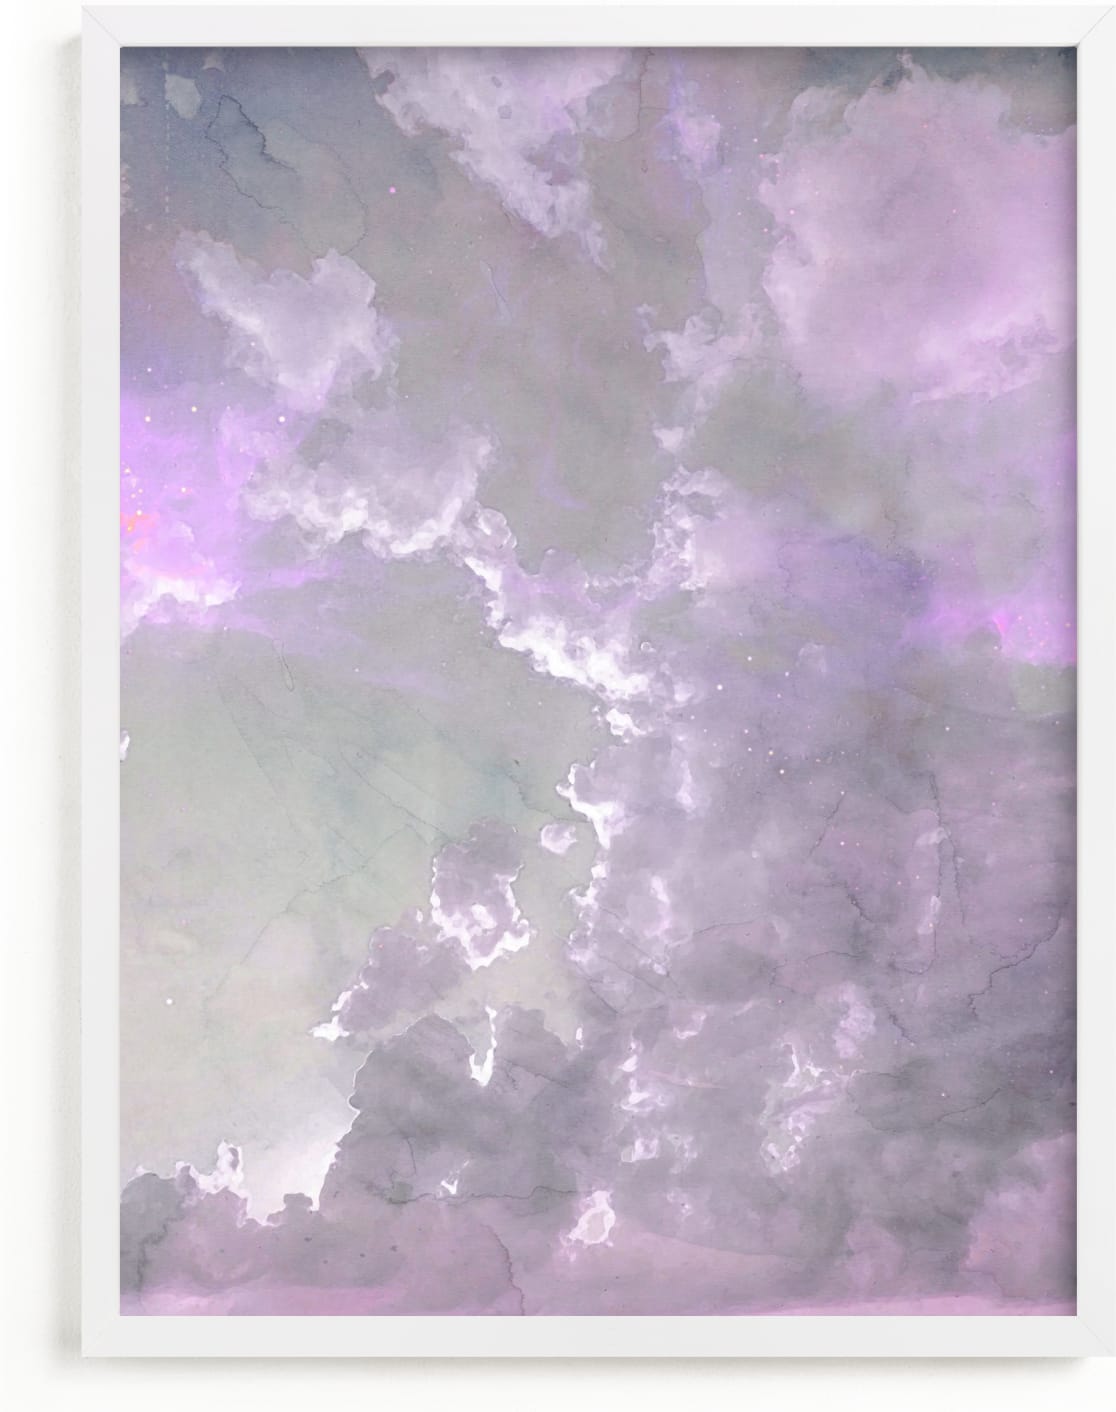 This is a purple art by EMANUELA CARRATONI called Candy Sky.